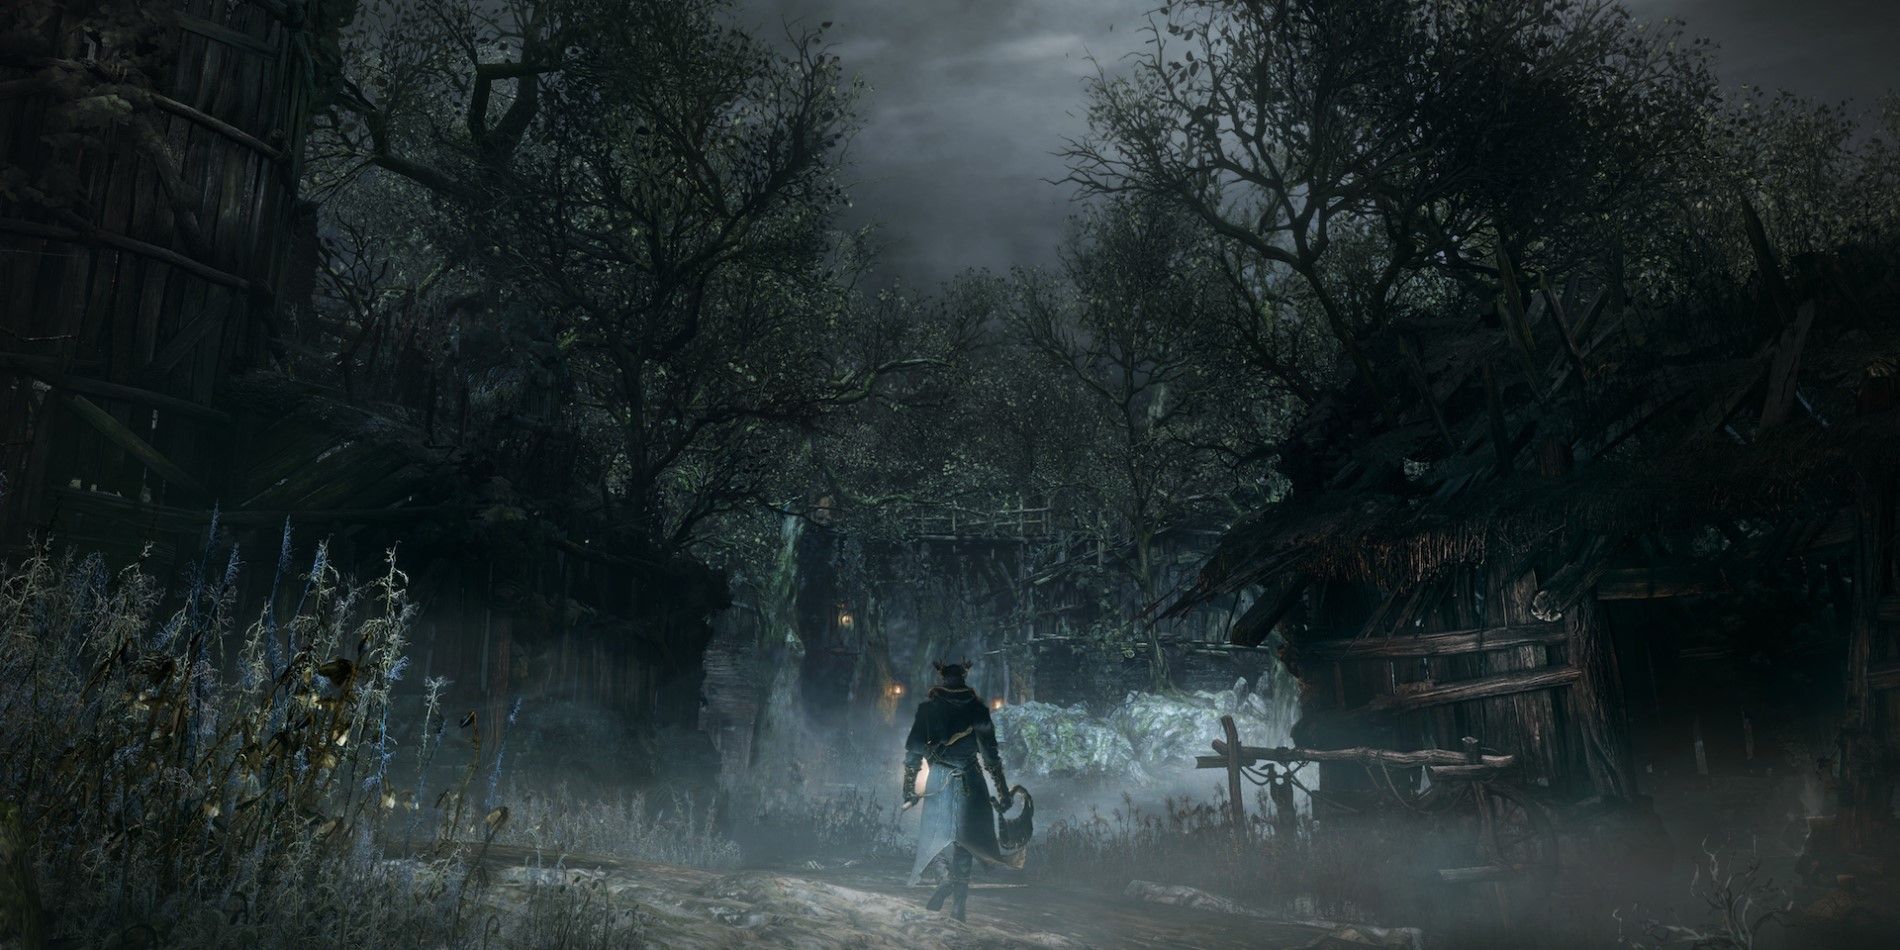 Rumor: Bloodborne coming to PlayStation 5, Steam with 4K 60FPS support